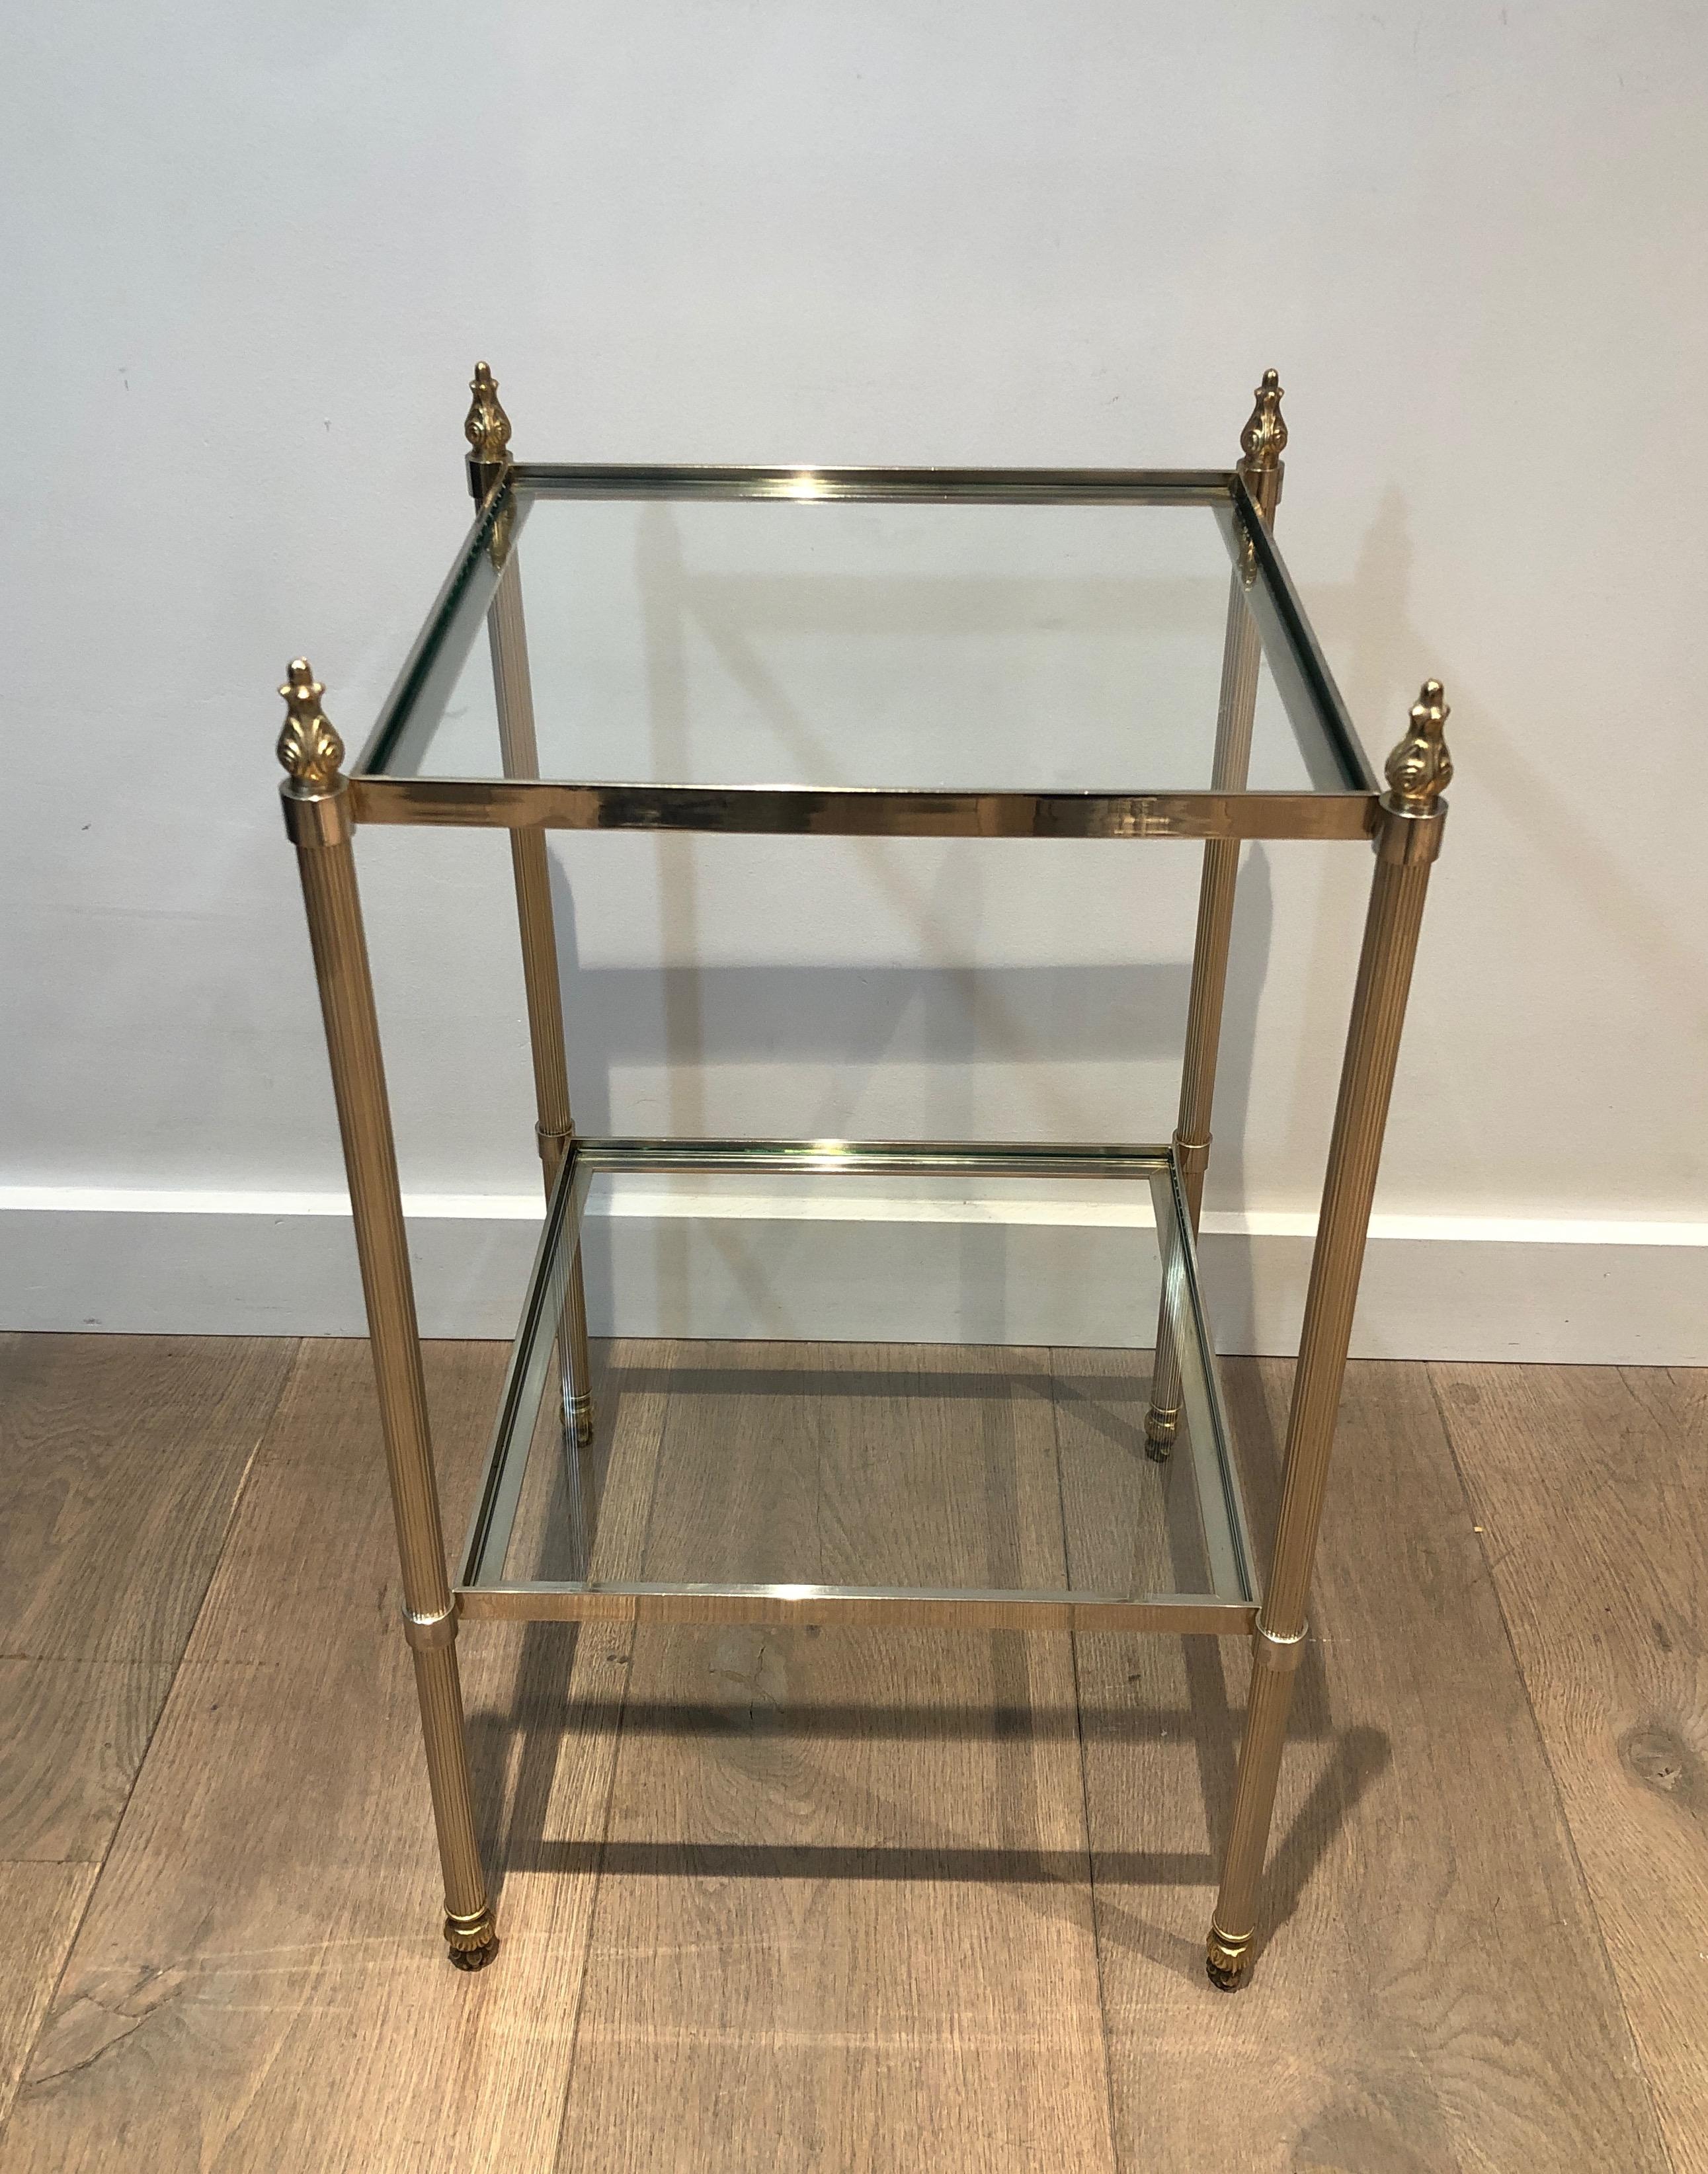 Brass Pair of Silver Plated Side Tables with 2 Tiers and Fluted Legs, French Work Attr